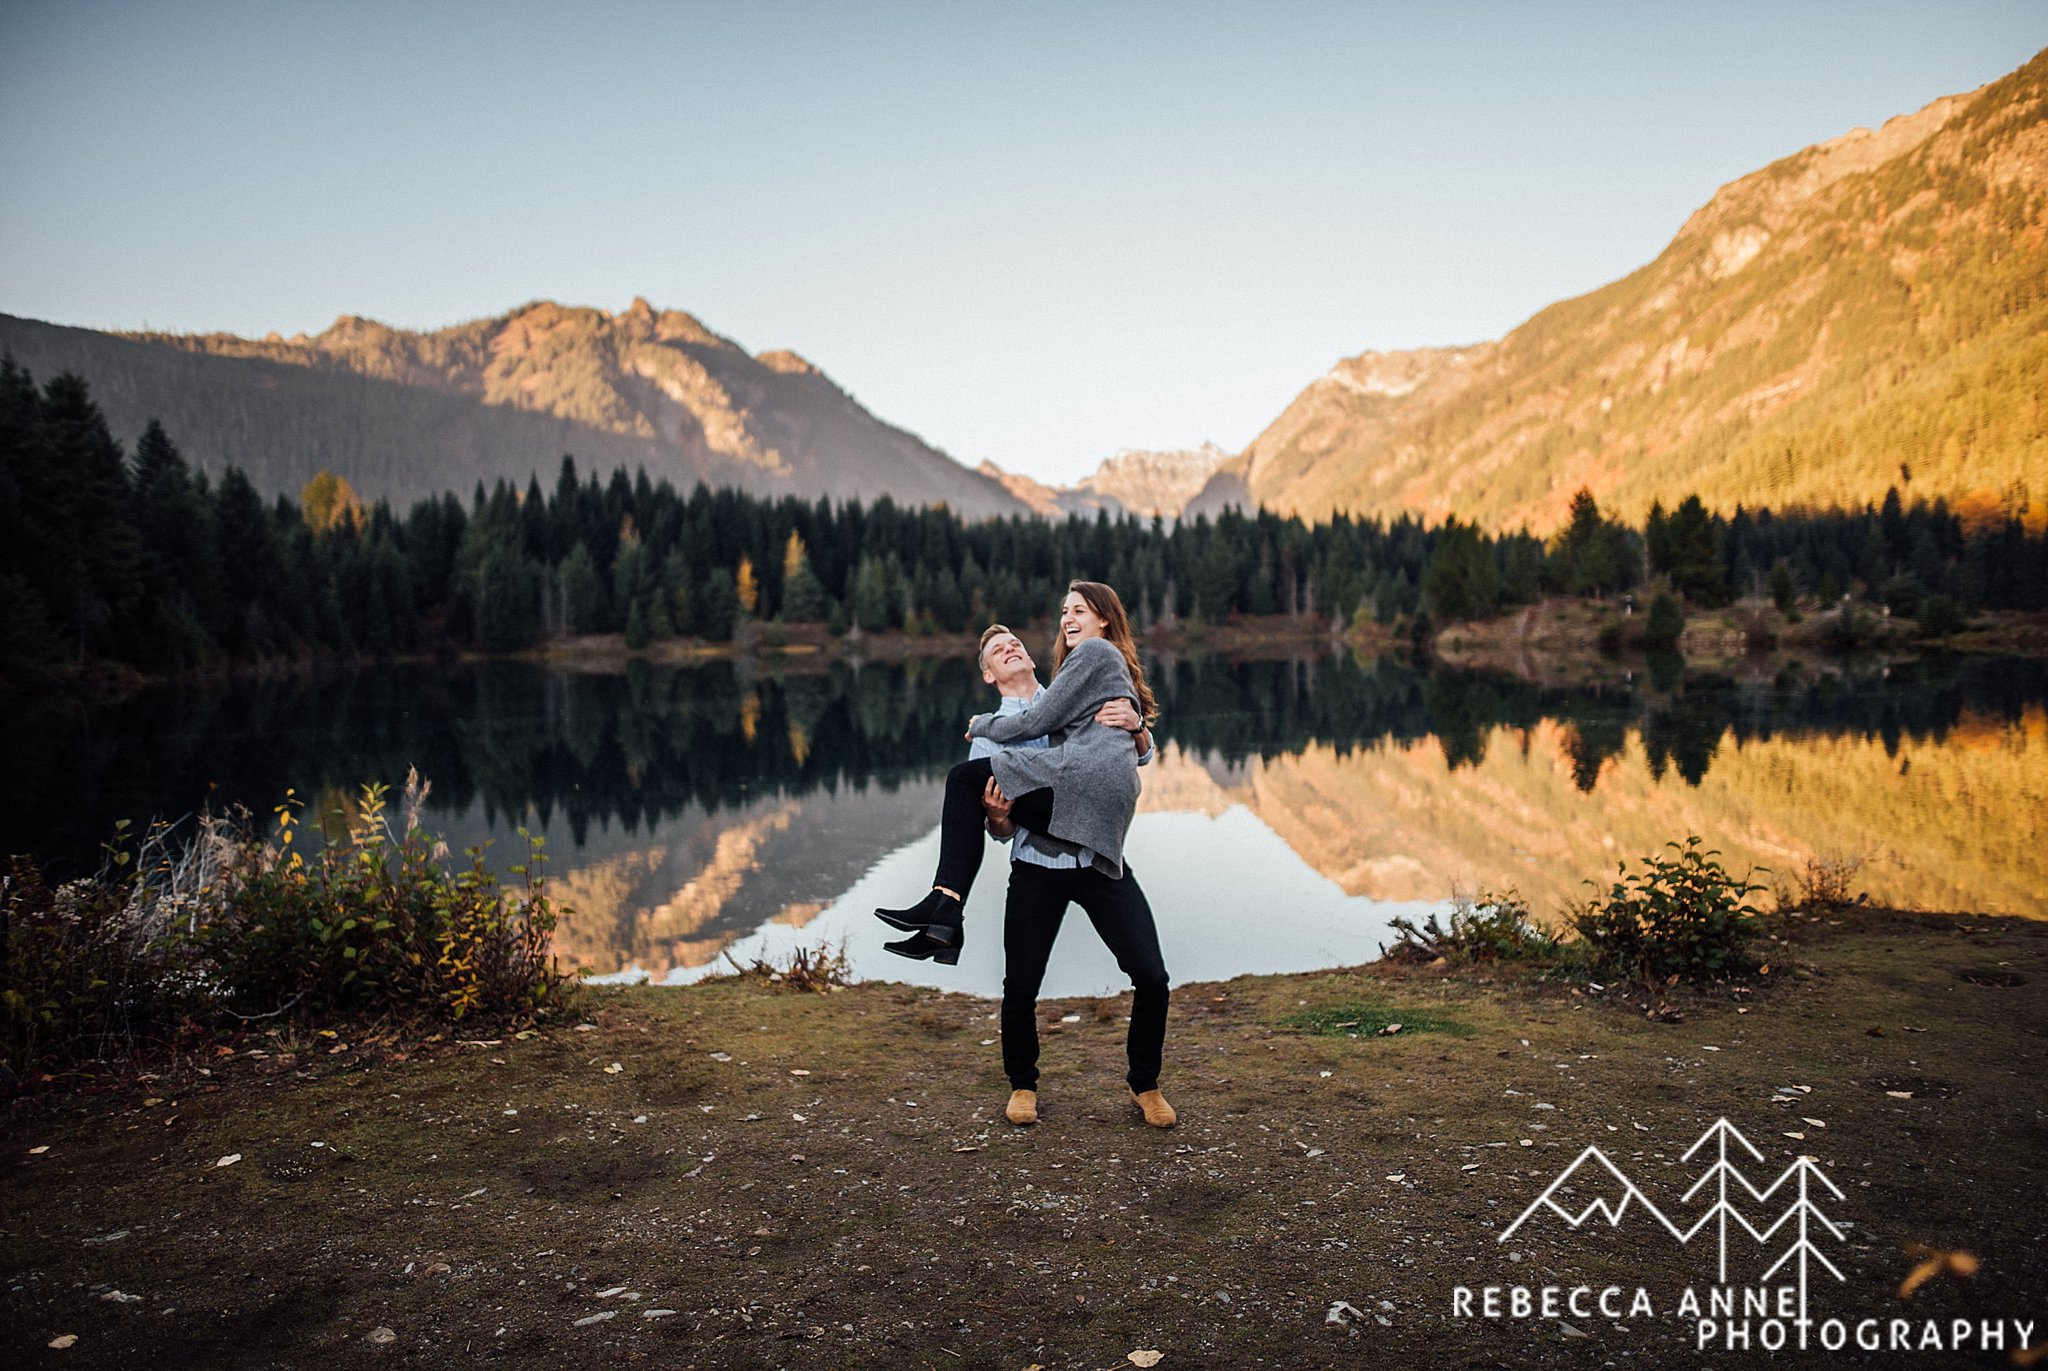 Gold Creek Pond Engagement,Snoqualmie Pass Engagement,North Bend Engagement,Seattle engagement photographer,Seattle engagement Photography,washington engagement photographer,pacific northwest engagement photographer,tacoma engagement photographer,tacoma engagement photography,washington engagement photography,pacific northwest engagement photography,